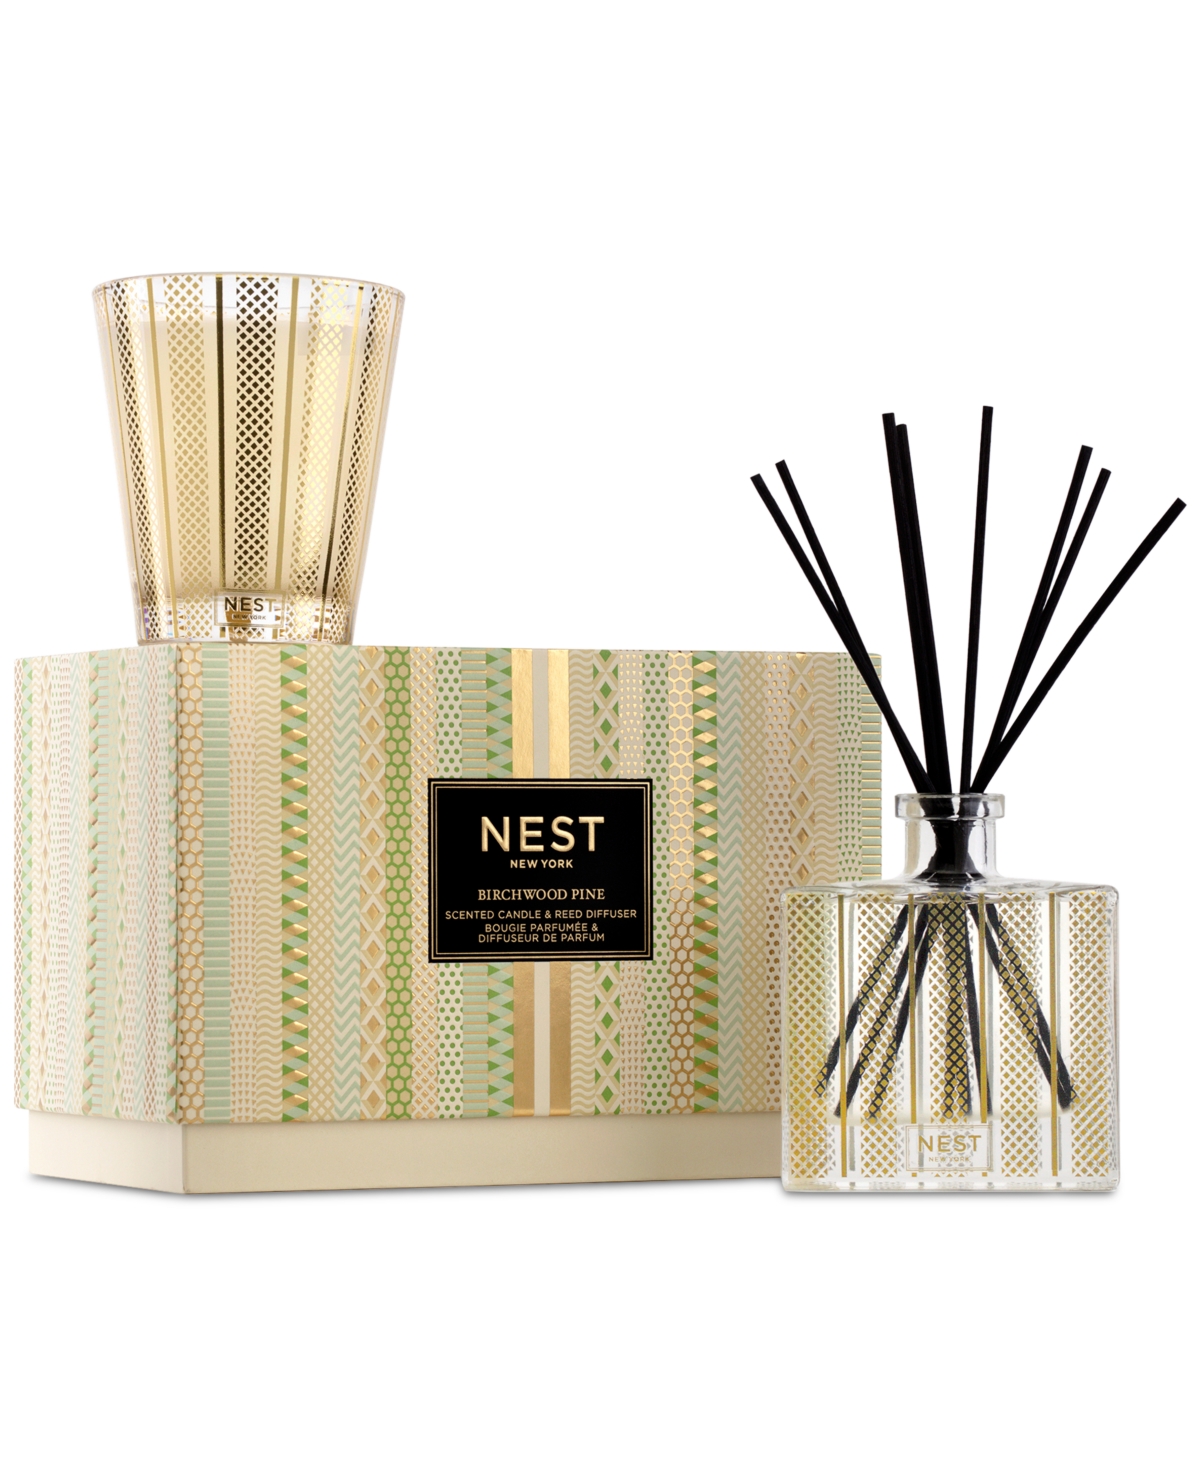 NEST NEW YORK 2-PC. BIRCHWOOD PINE CANDLE & REED DIFFUSER GIFT SET